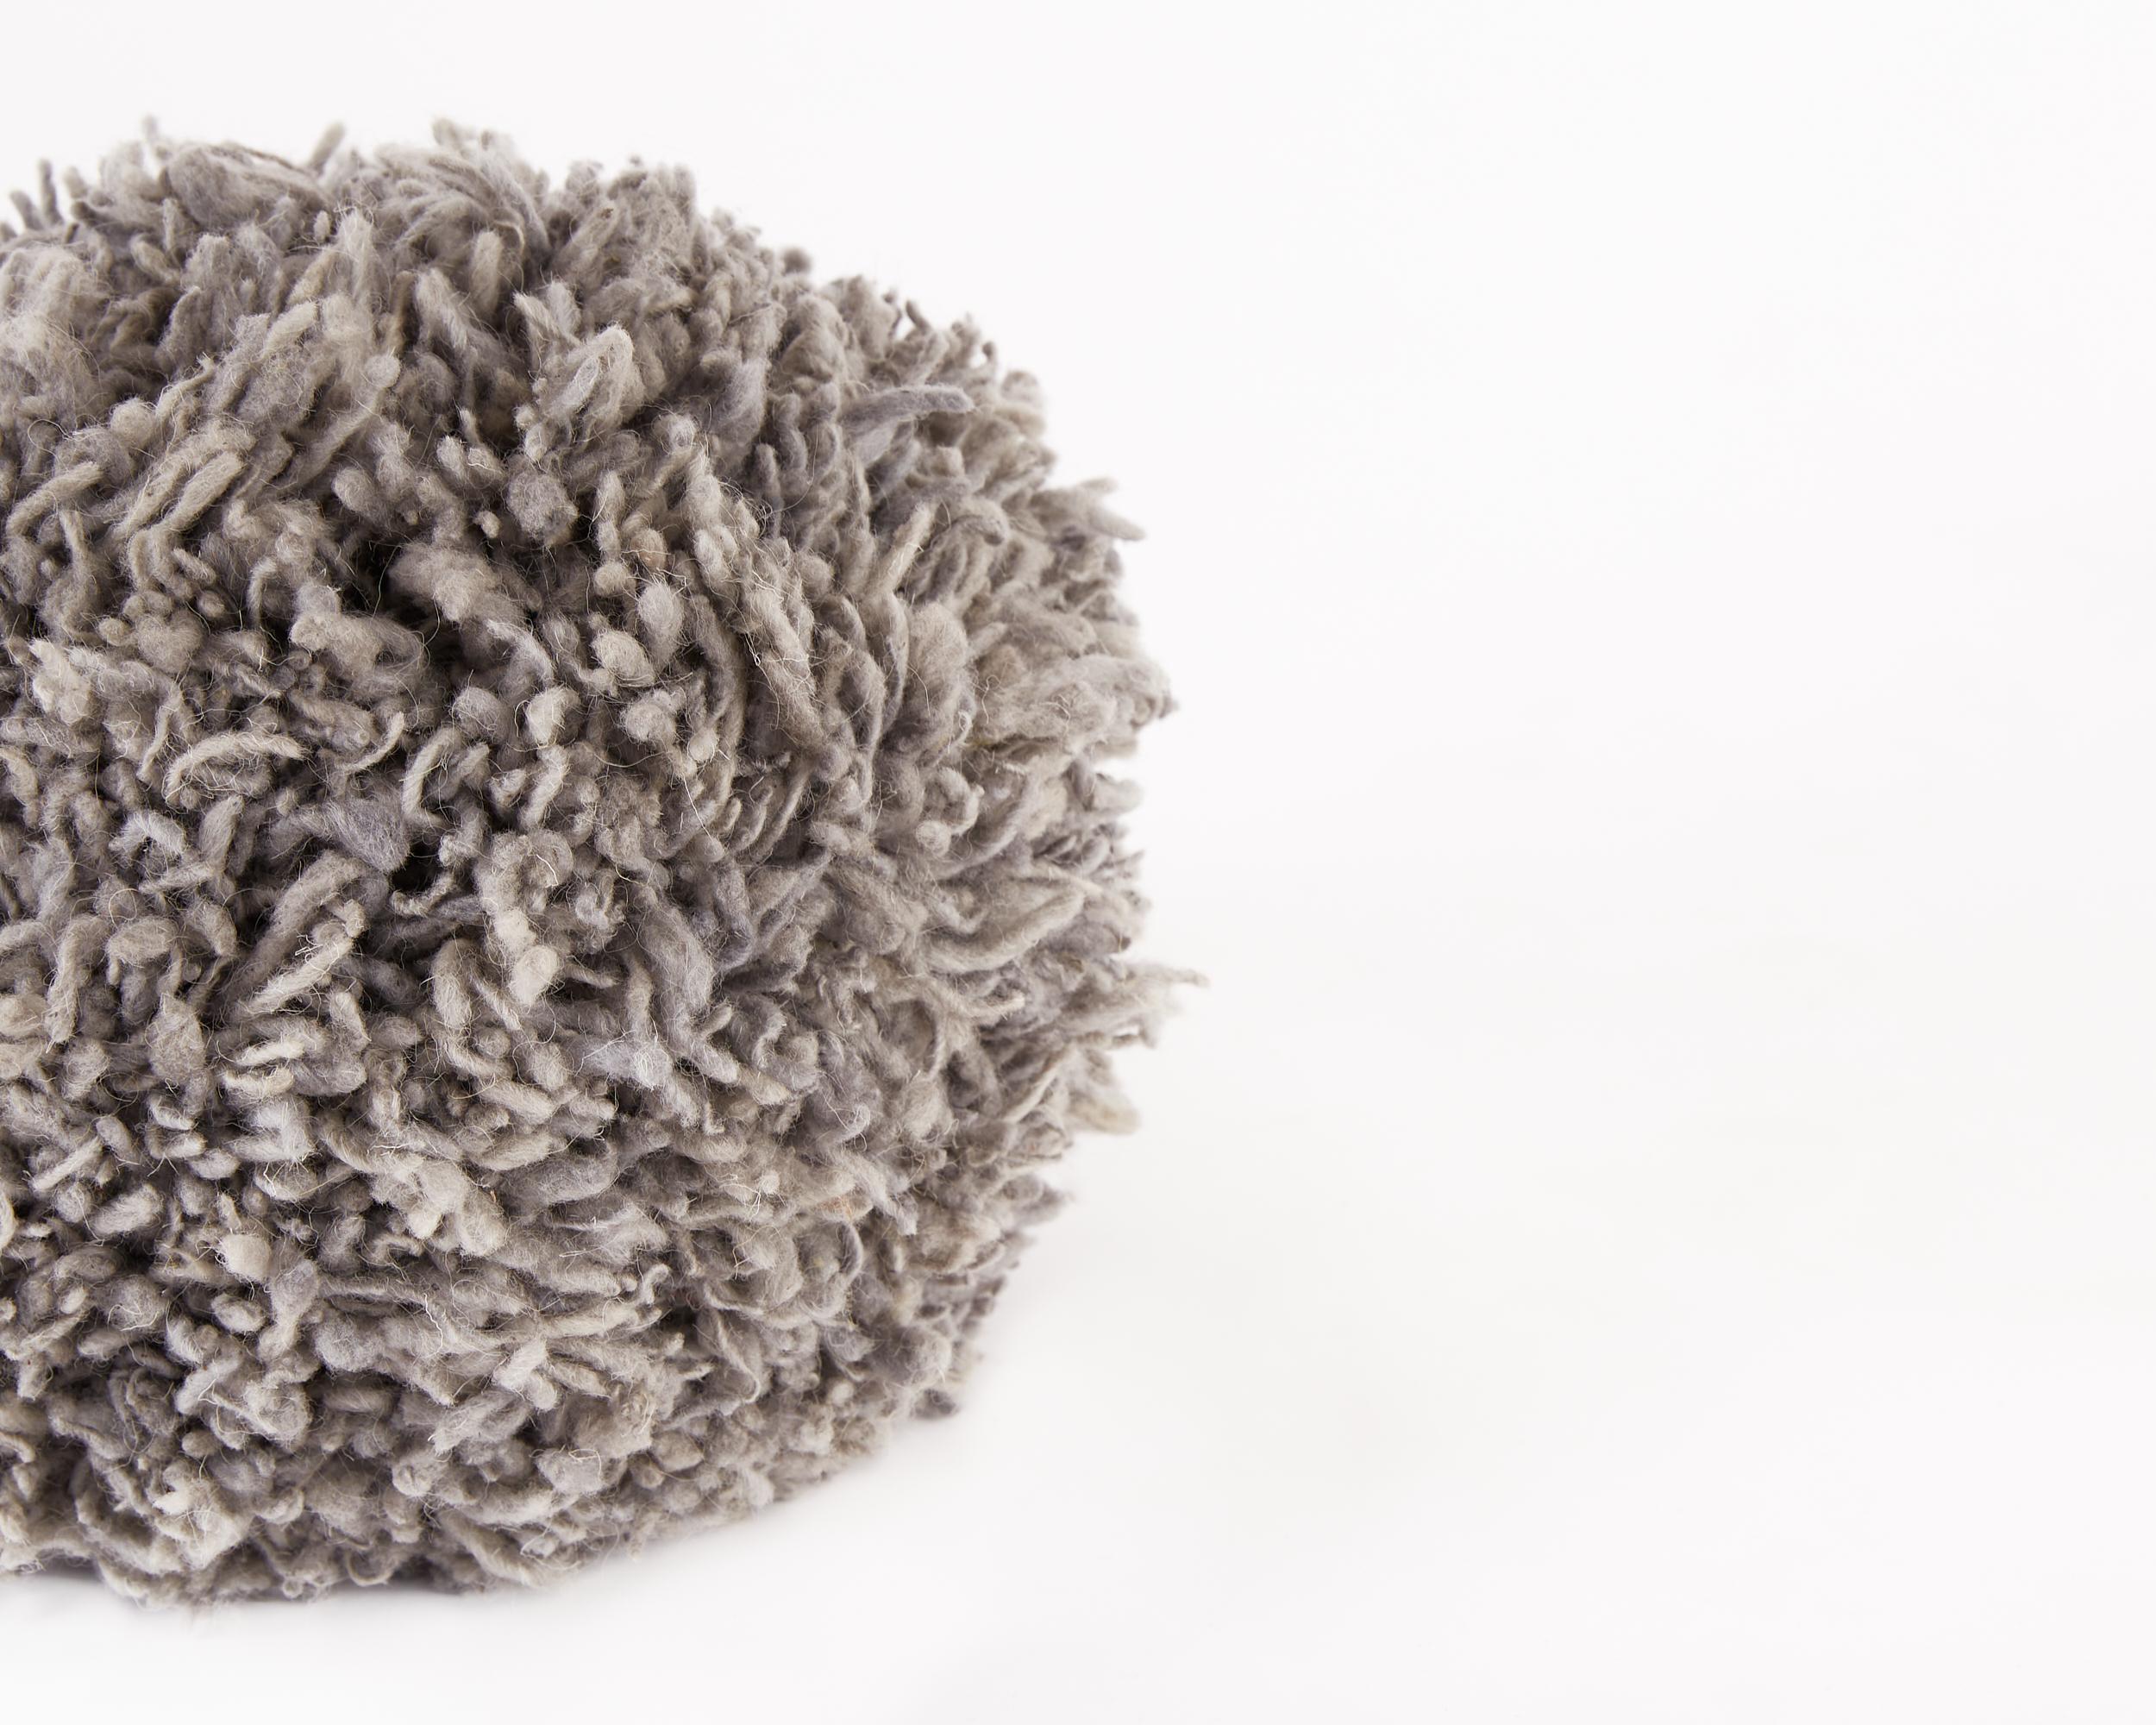 The Momo in Silver is part of our newest homeware collection. It is made completely out of natural wool sourced from Momostenango, Guatemala. Each one of them is hand-made using the traditional pom-pom technique, creating a very playful accessory to